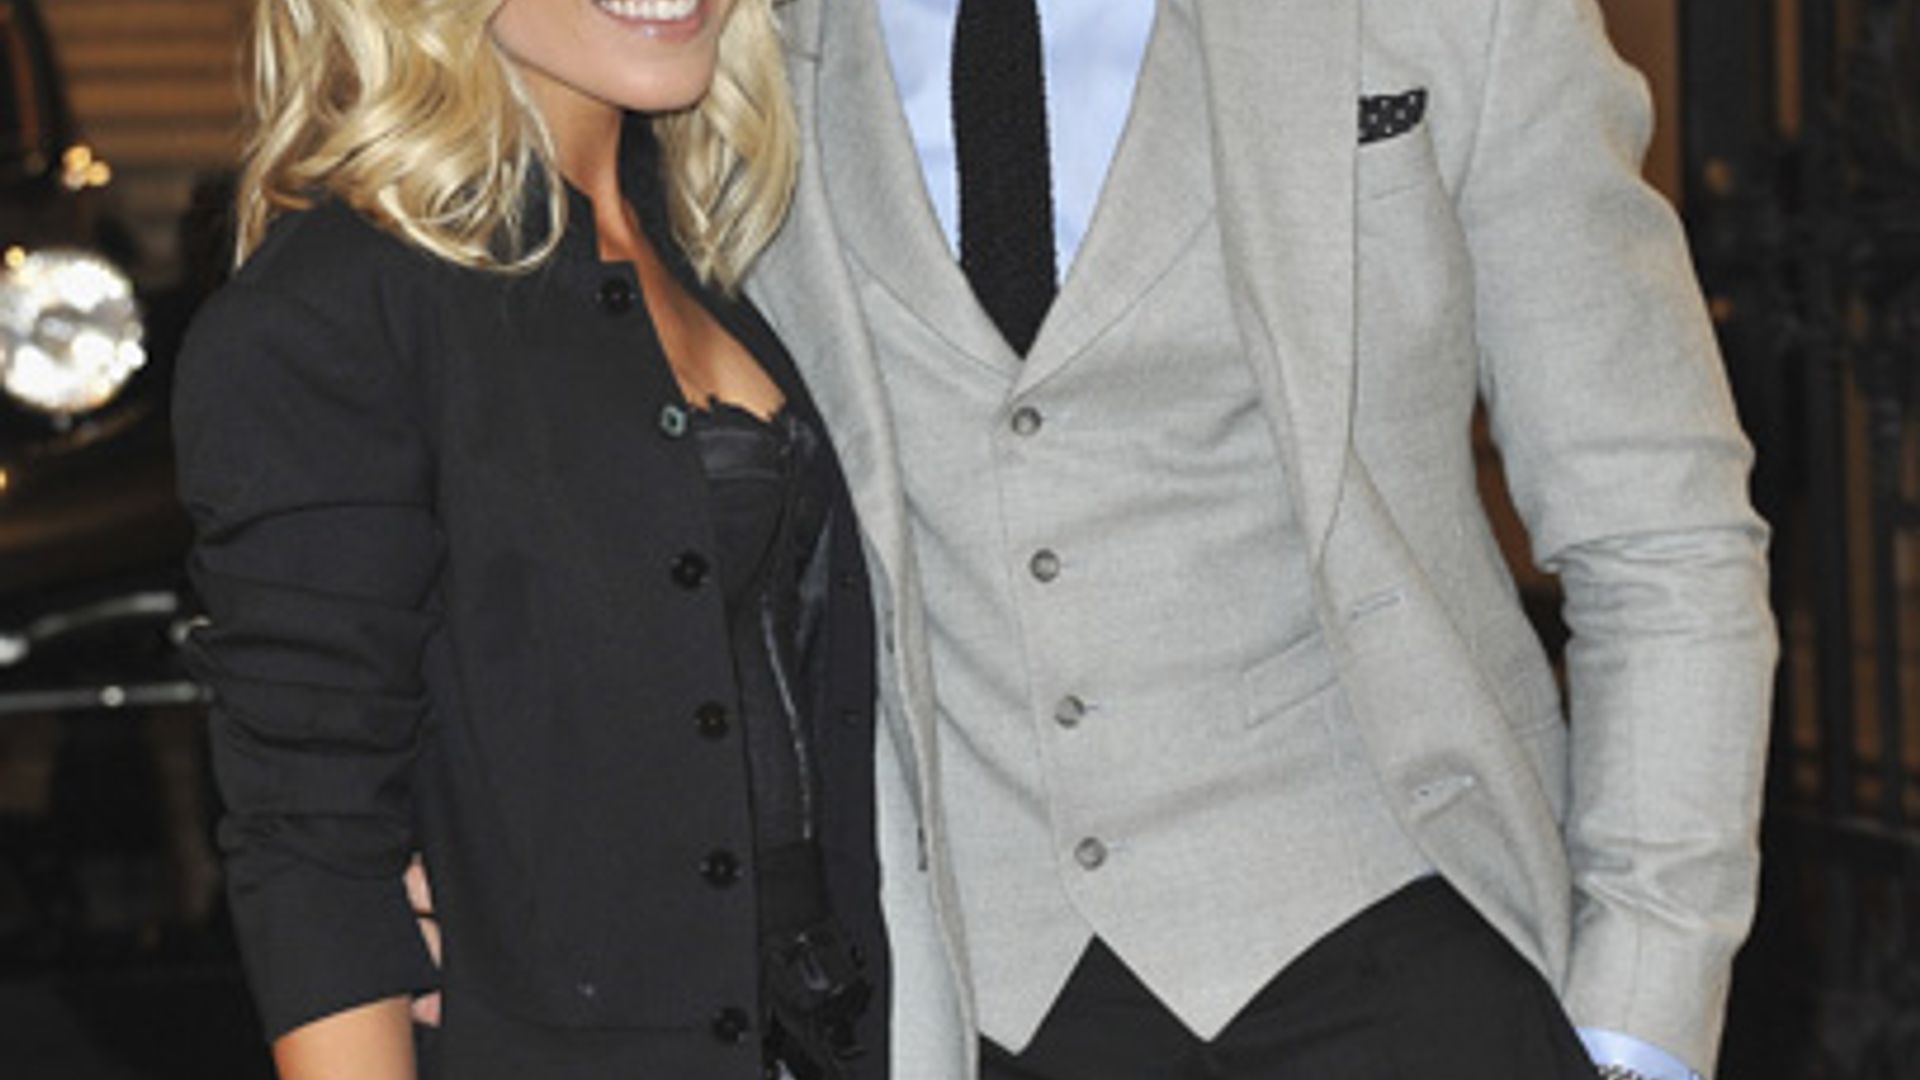 David Gandy confirms his relationship with Mollie King